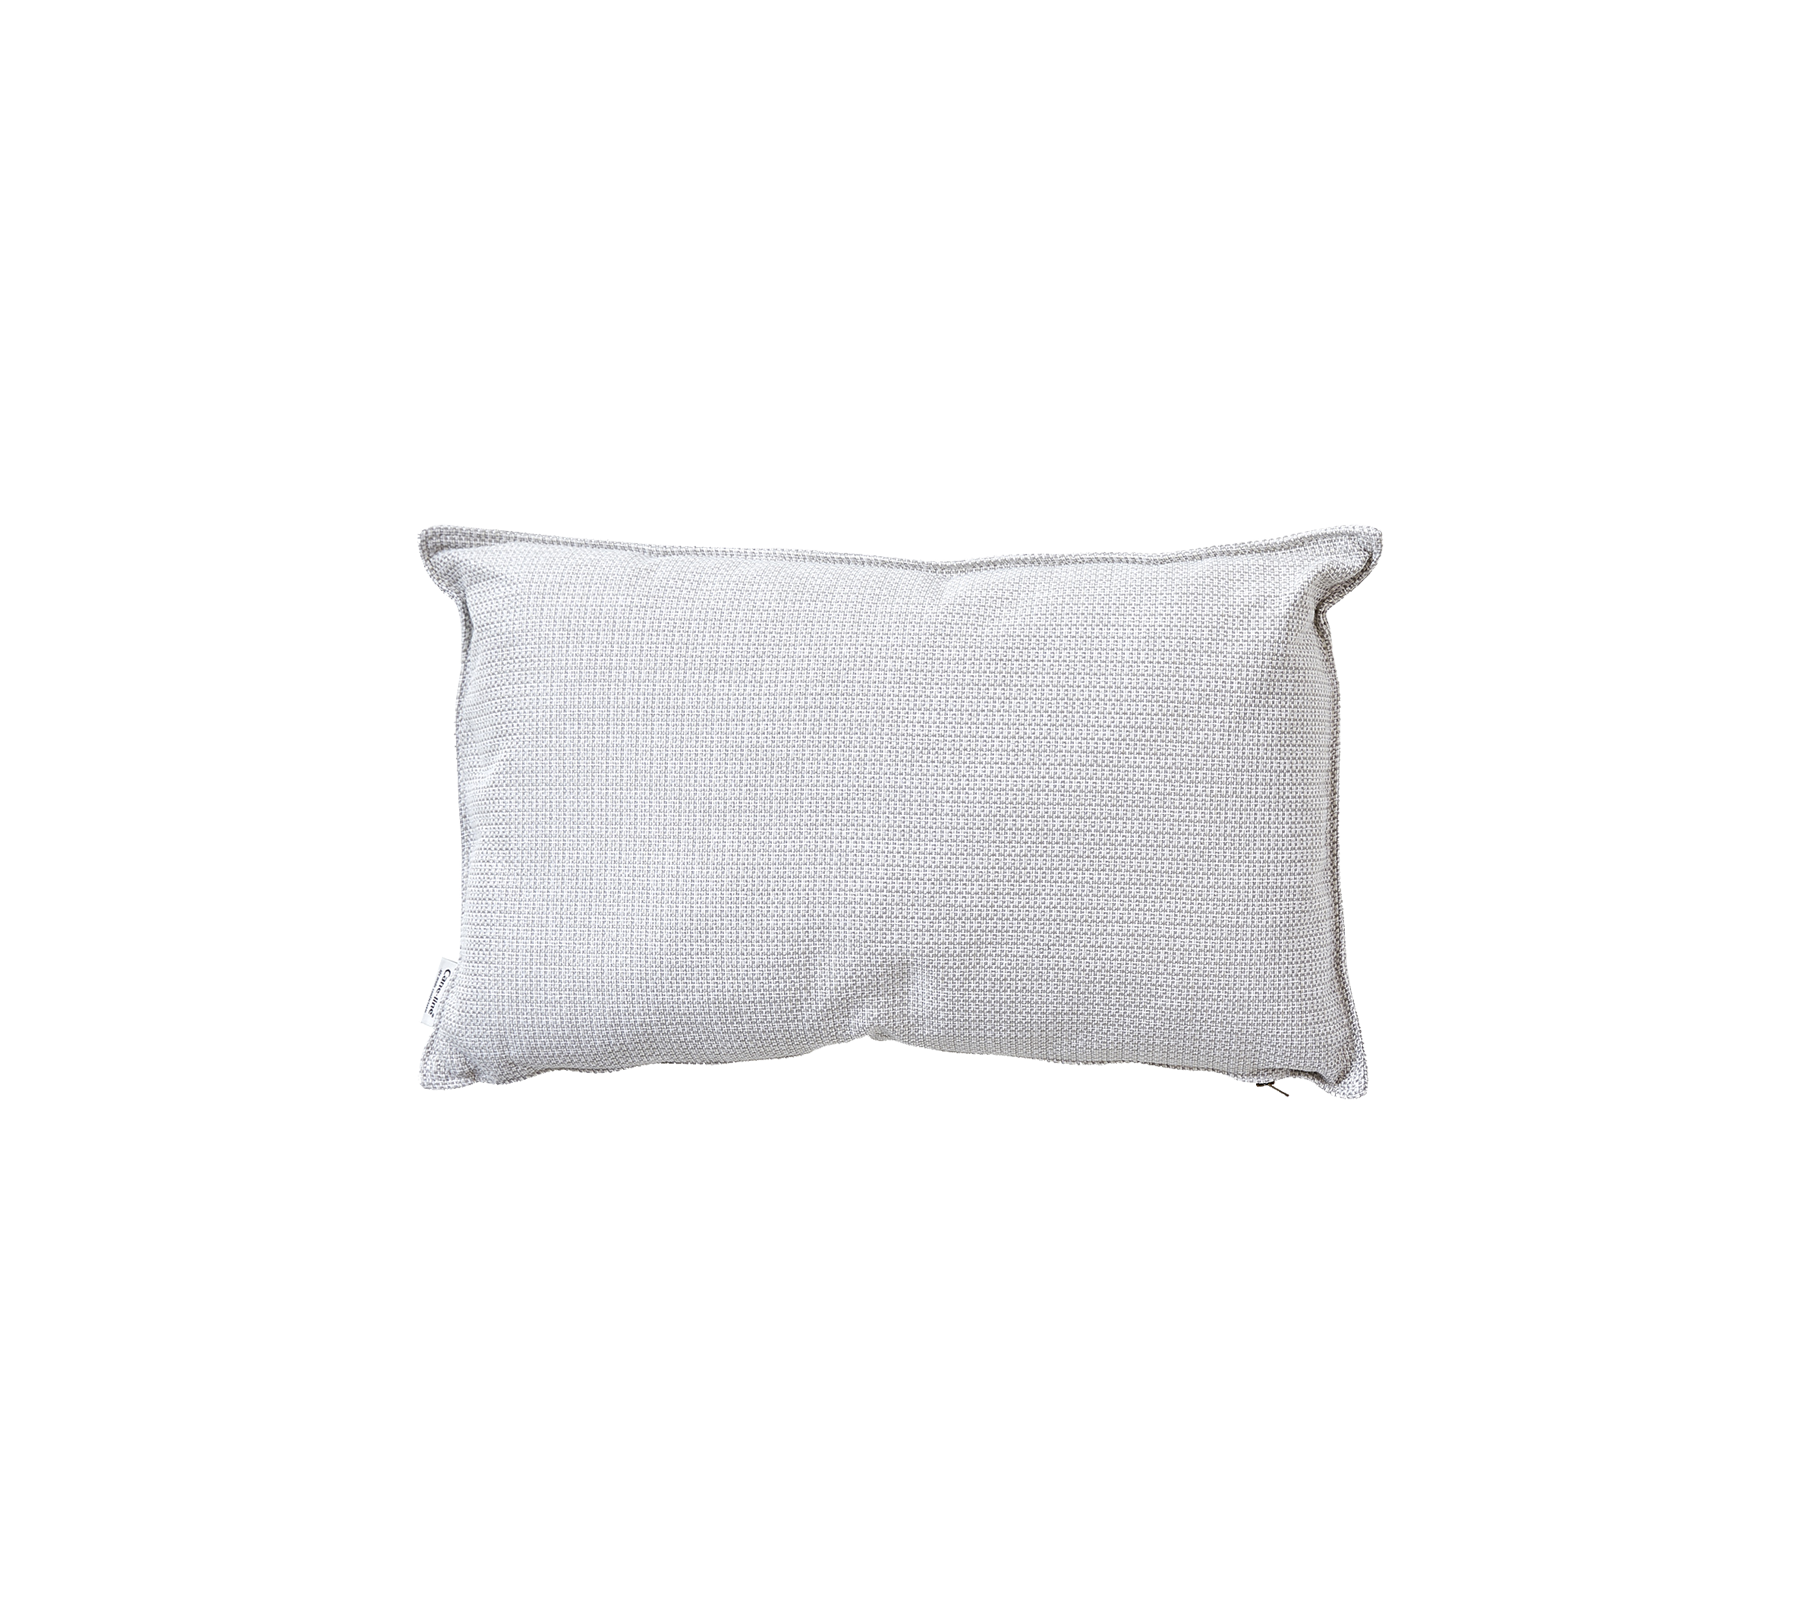 Cane-Line - Link scatter cushion, 32x52x12 cm